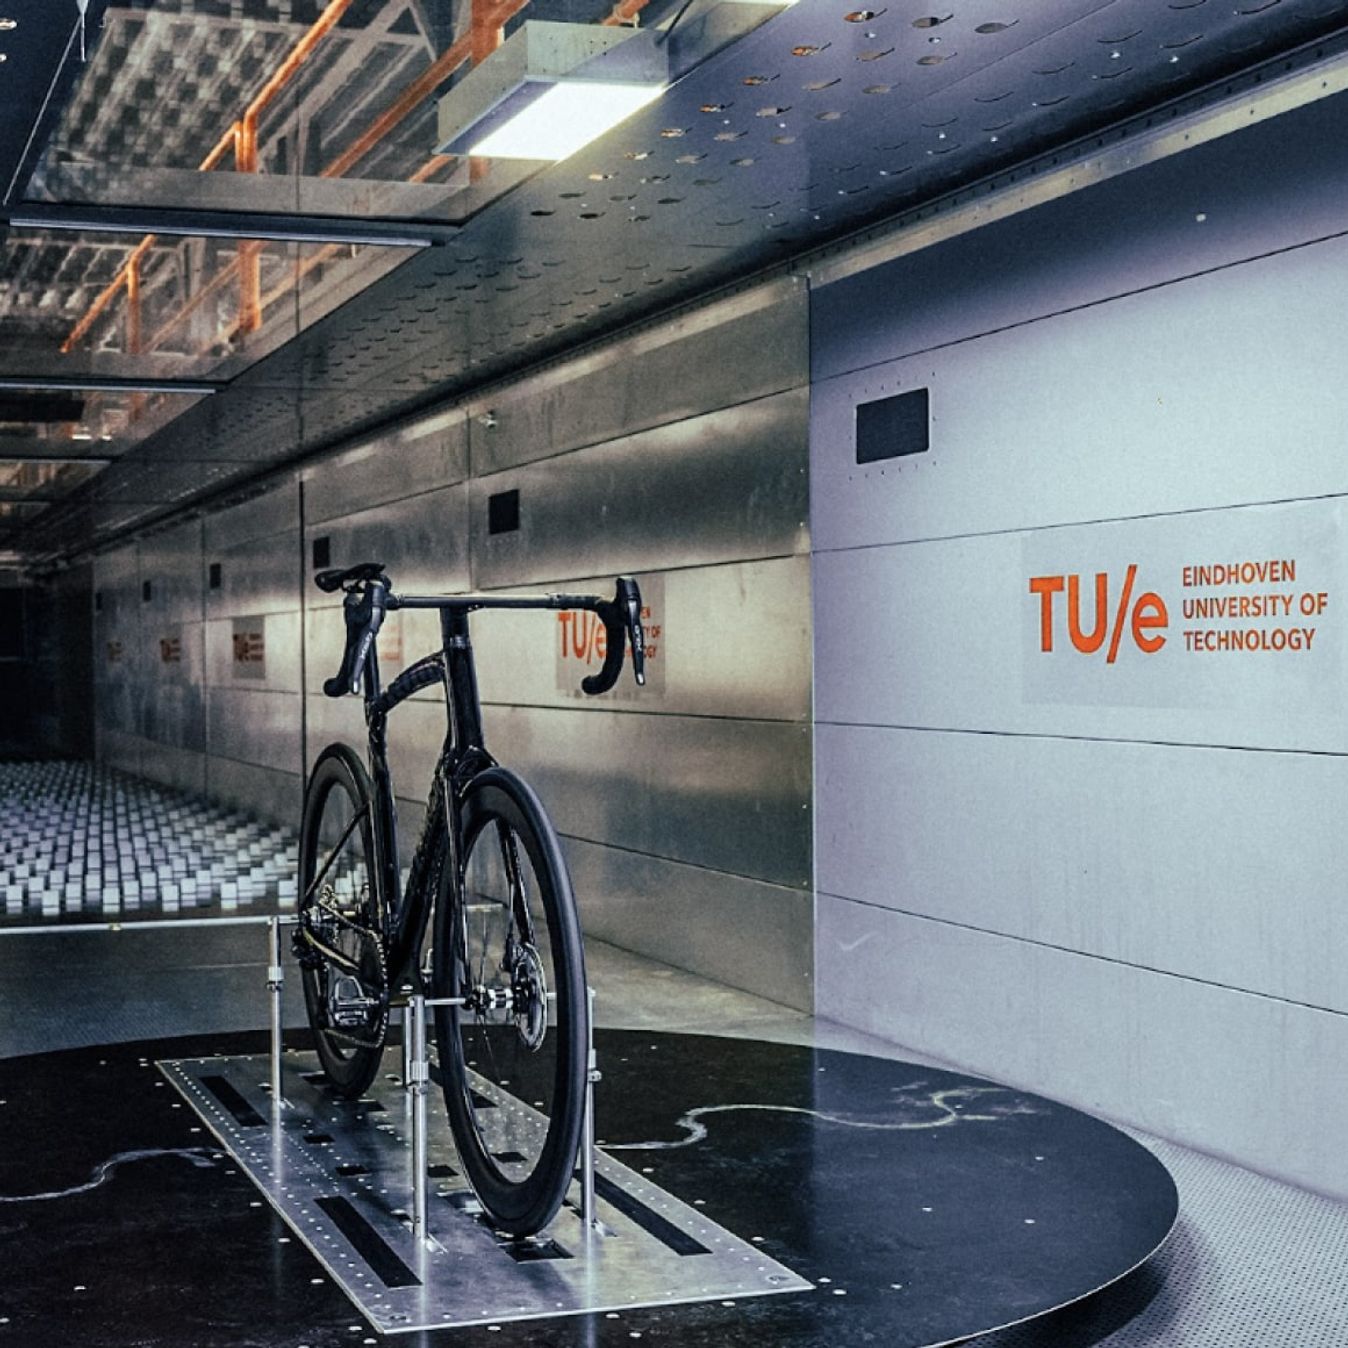 Classified has tested the set-up in a wind tunnel at the Eindhoven University of Technology